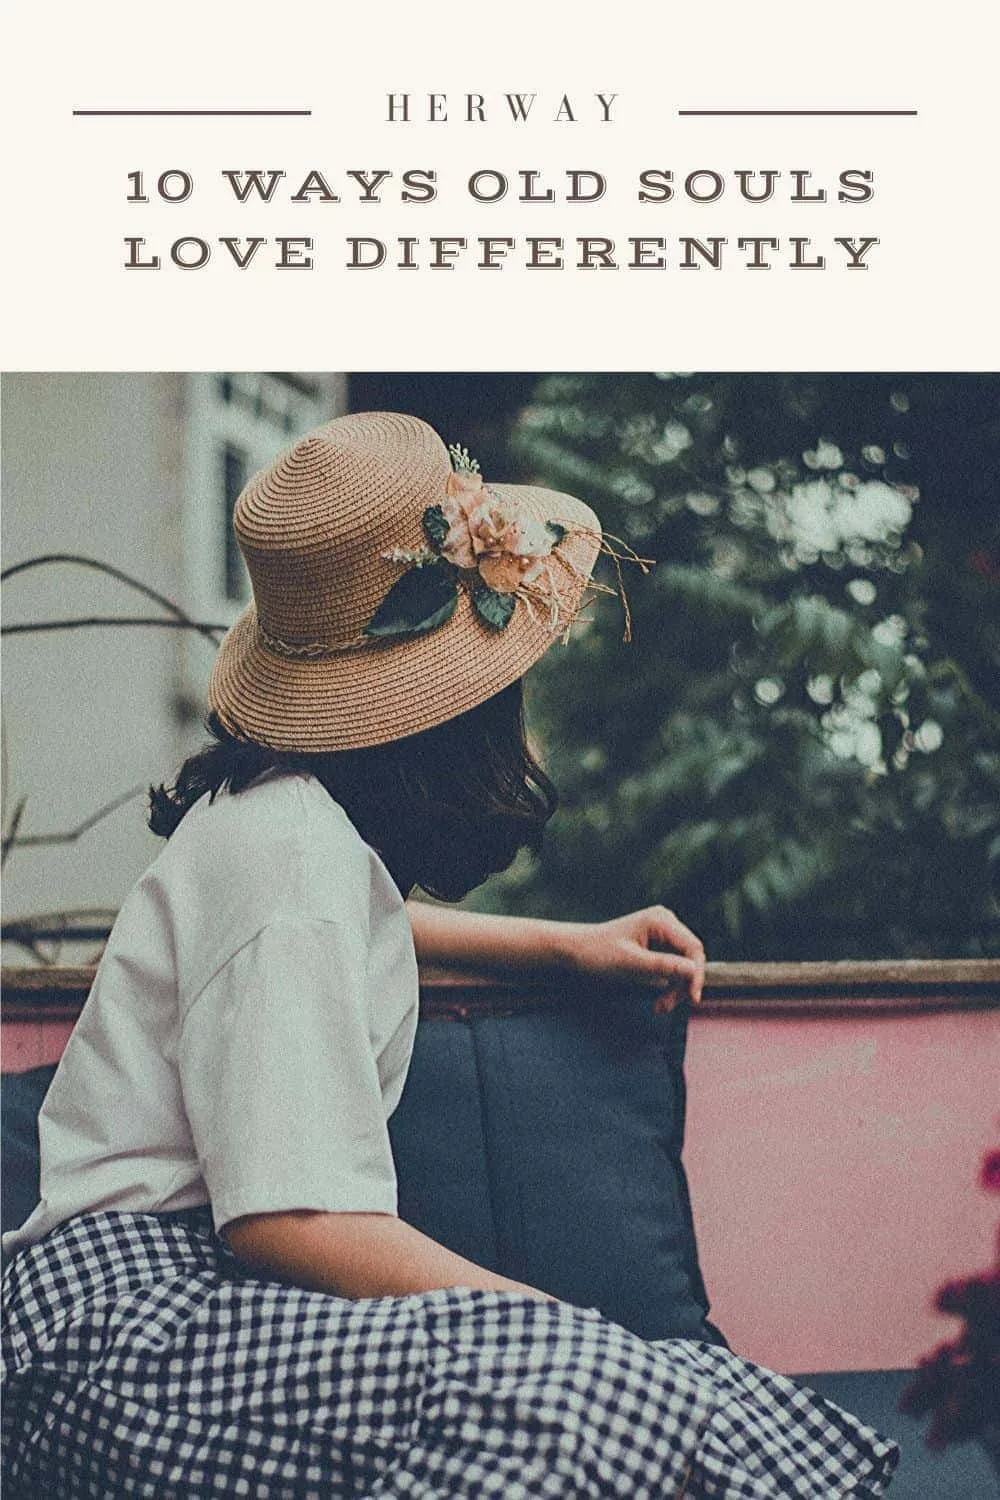 10 Ways Old Souls Love Differently